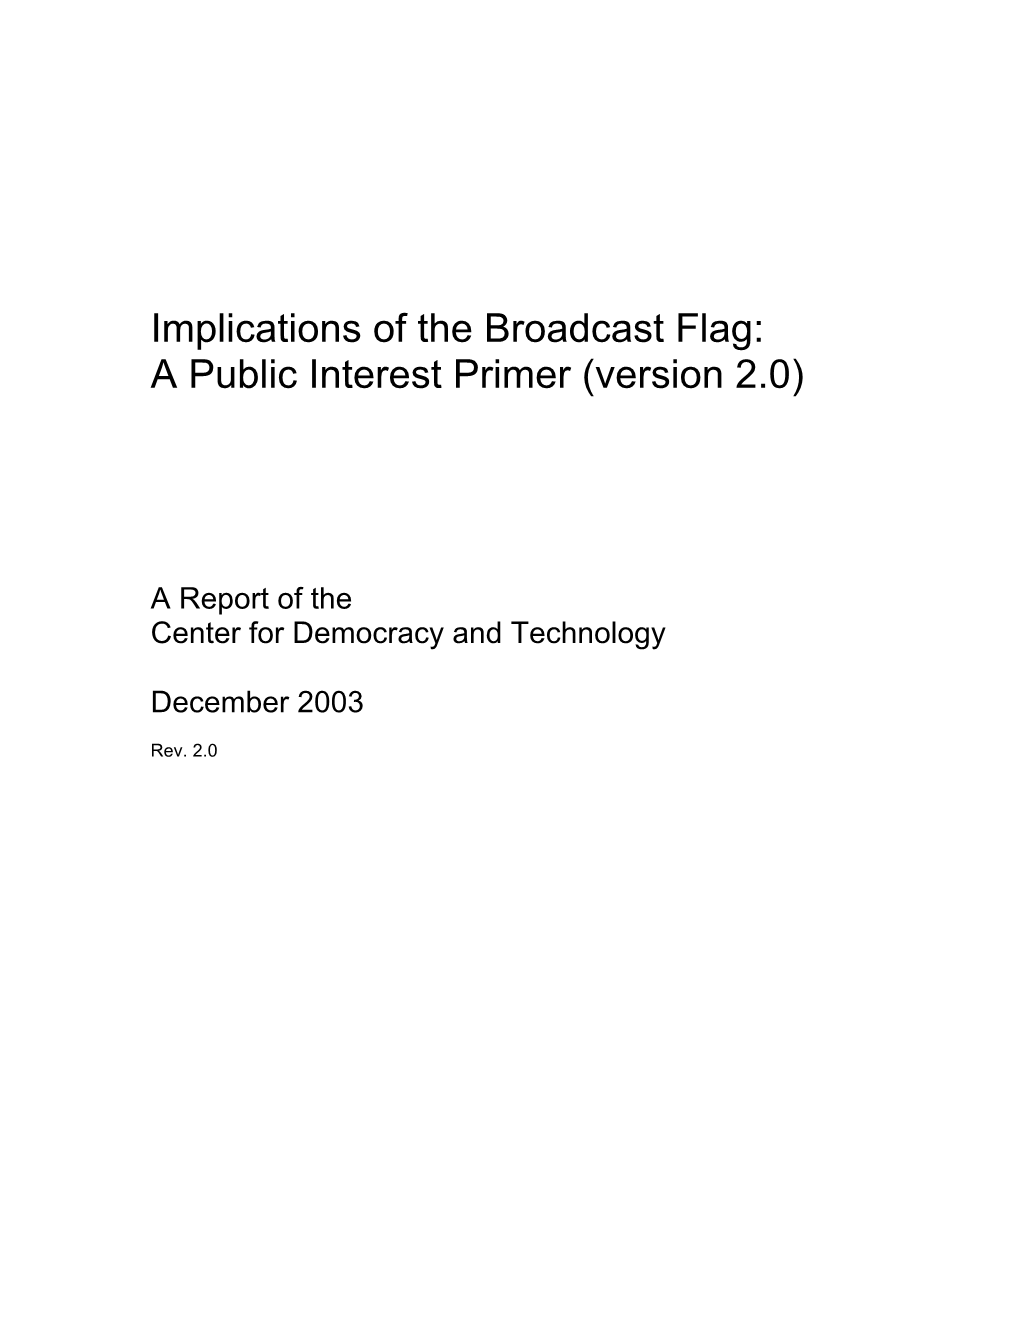 Implications of the Broadcast Flag: a Public Interest Primer (Version 2.0)